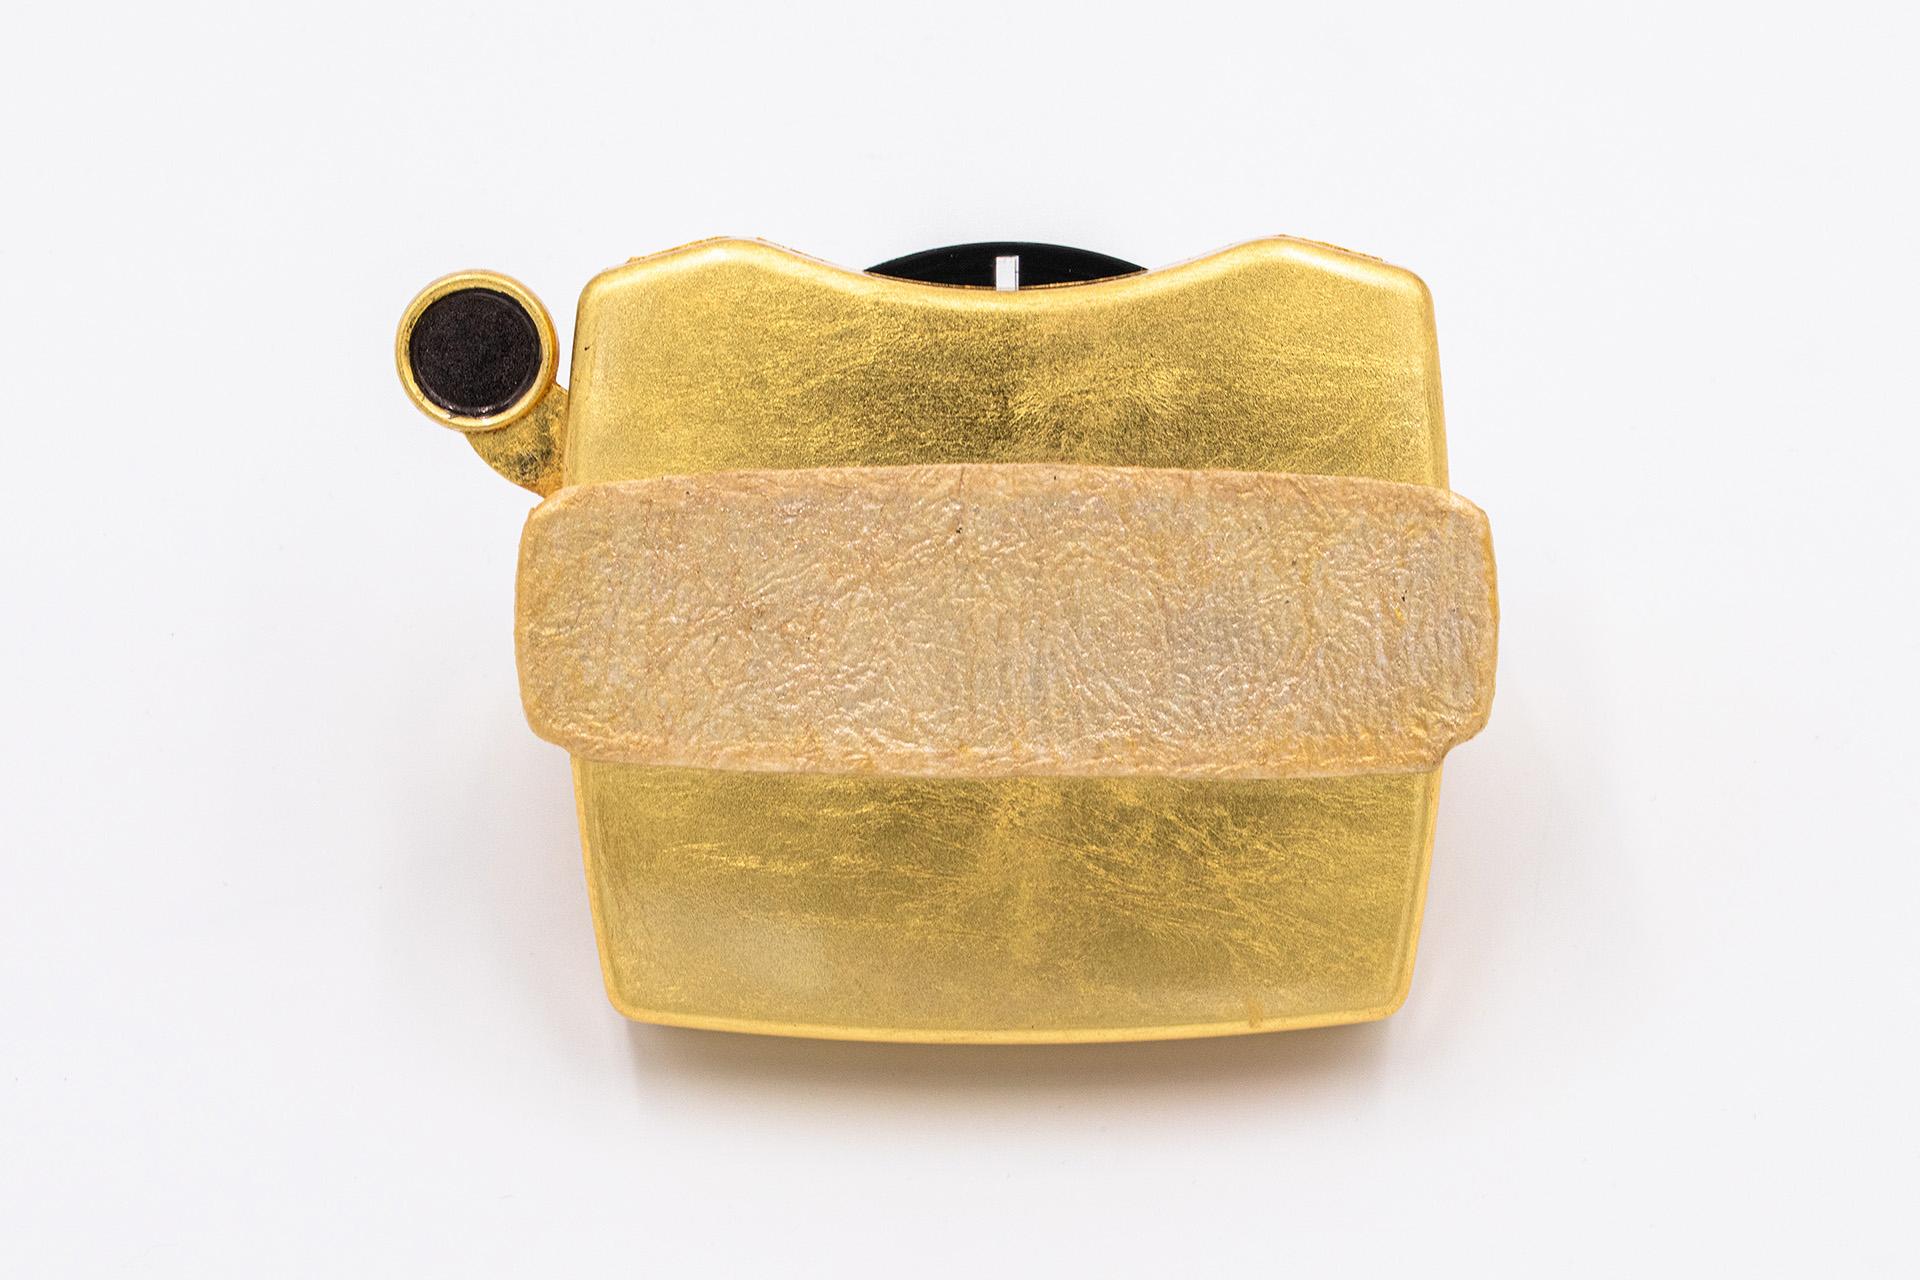 Gloss finish gold leaf over ABS thermoplastic viewer / Washi diffuser with gold-tone wash and gold kindei wash

Kojun is an self-taught multimédia American artist born in 1977 based in Tokyo, Japan since 1999. Kojun project started in 2010 explores